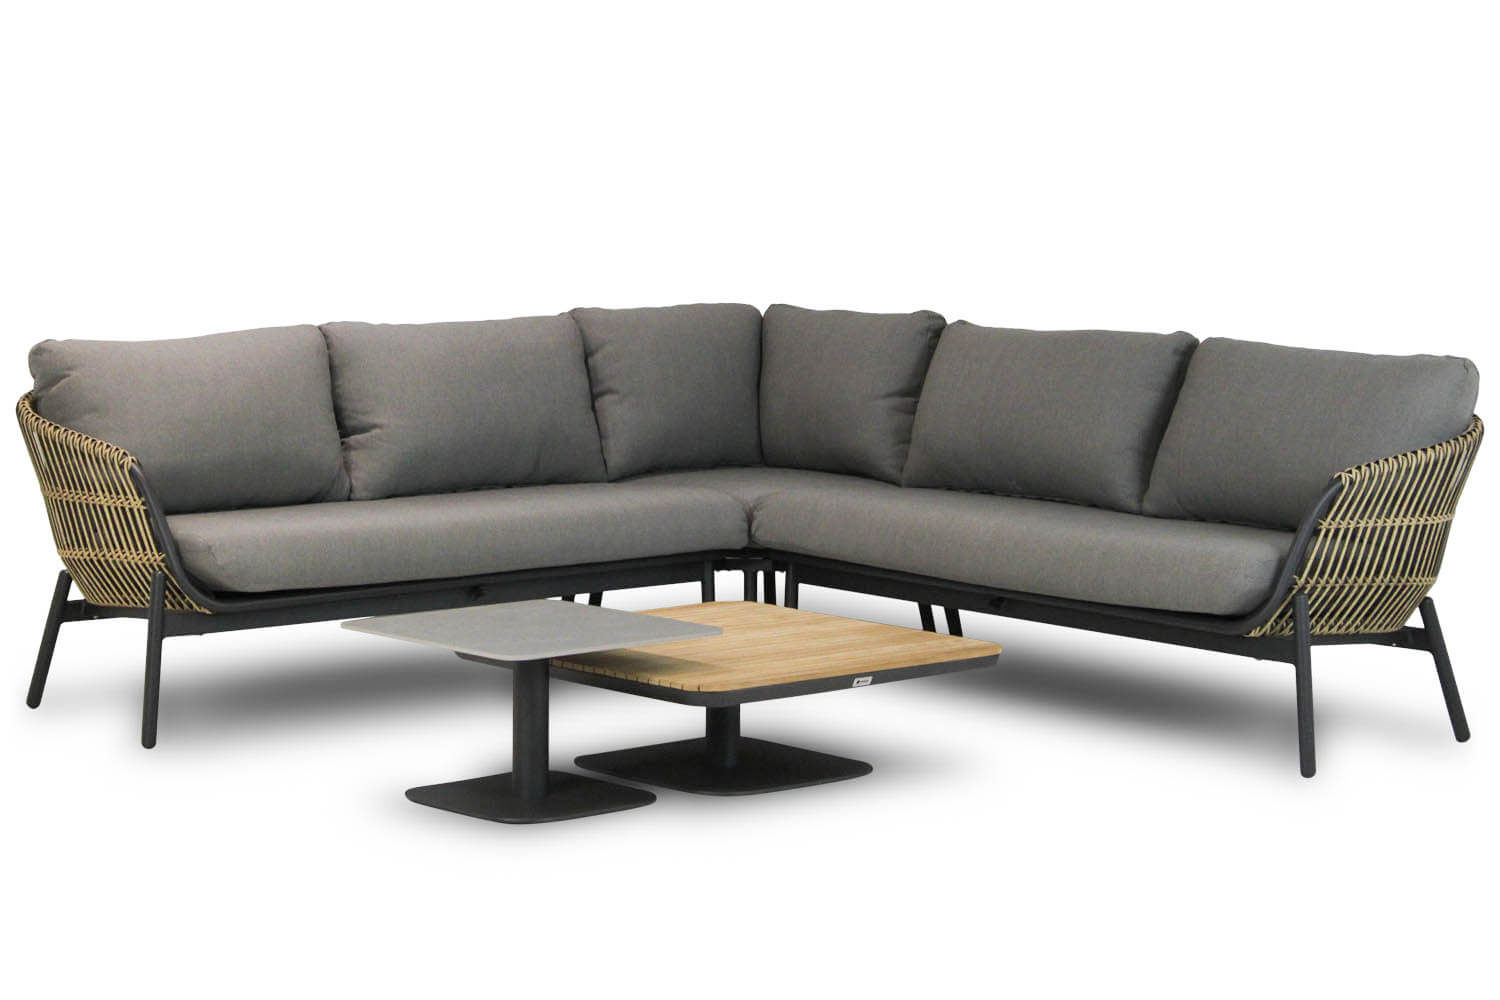 coco nathan loungeset ralph 60 90 - Coco Nathan/Ralph 60/90 cm hoek loungeset 5-delig